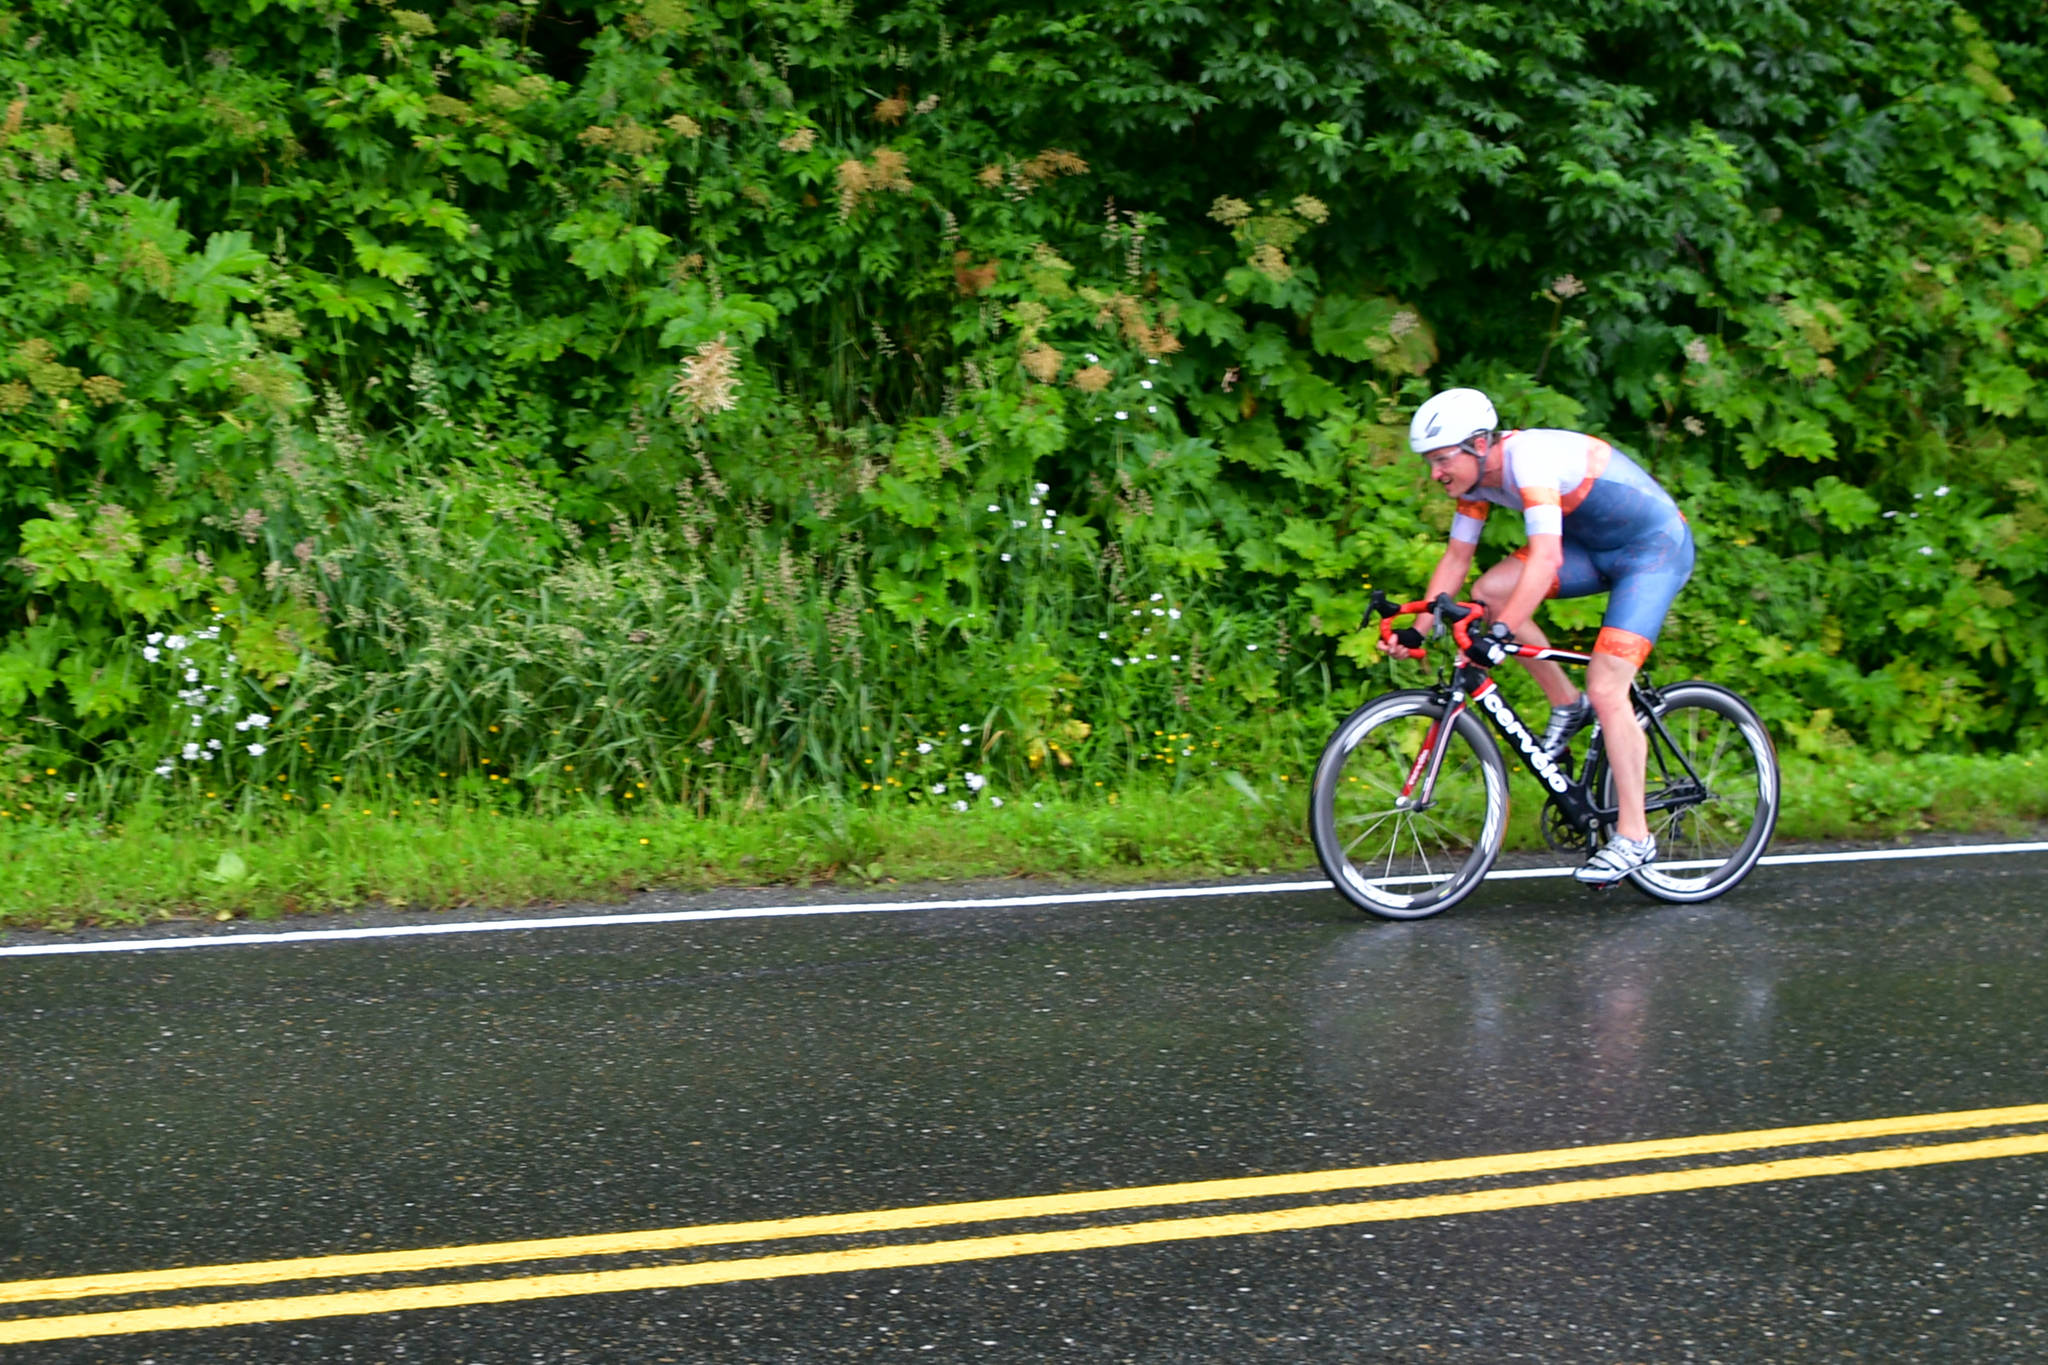 Justin Dorn pedals through the finish of Thane Road Donut Time Trial. Dorn claimed the top spot in the bicycle race that weights results based on the number of doughnuts each rider eats. Dorn finished with a doughnut-adjusted time of 21 minutes and 22 seconds by virtue of eating five doughnuts. (Courtesy Photo / Rob Welton)